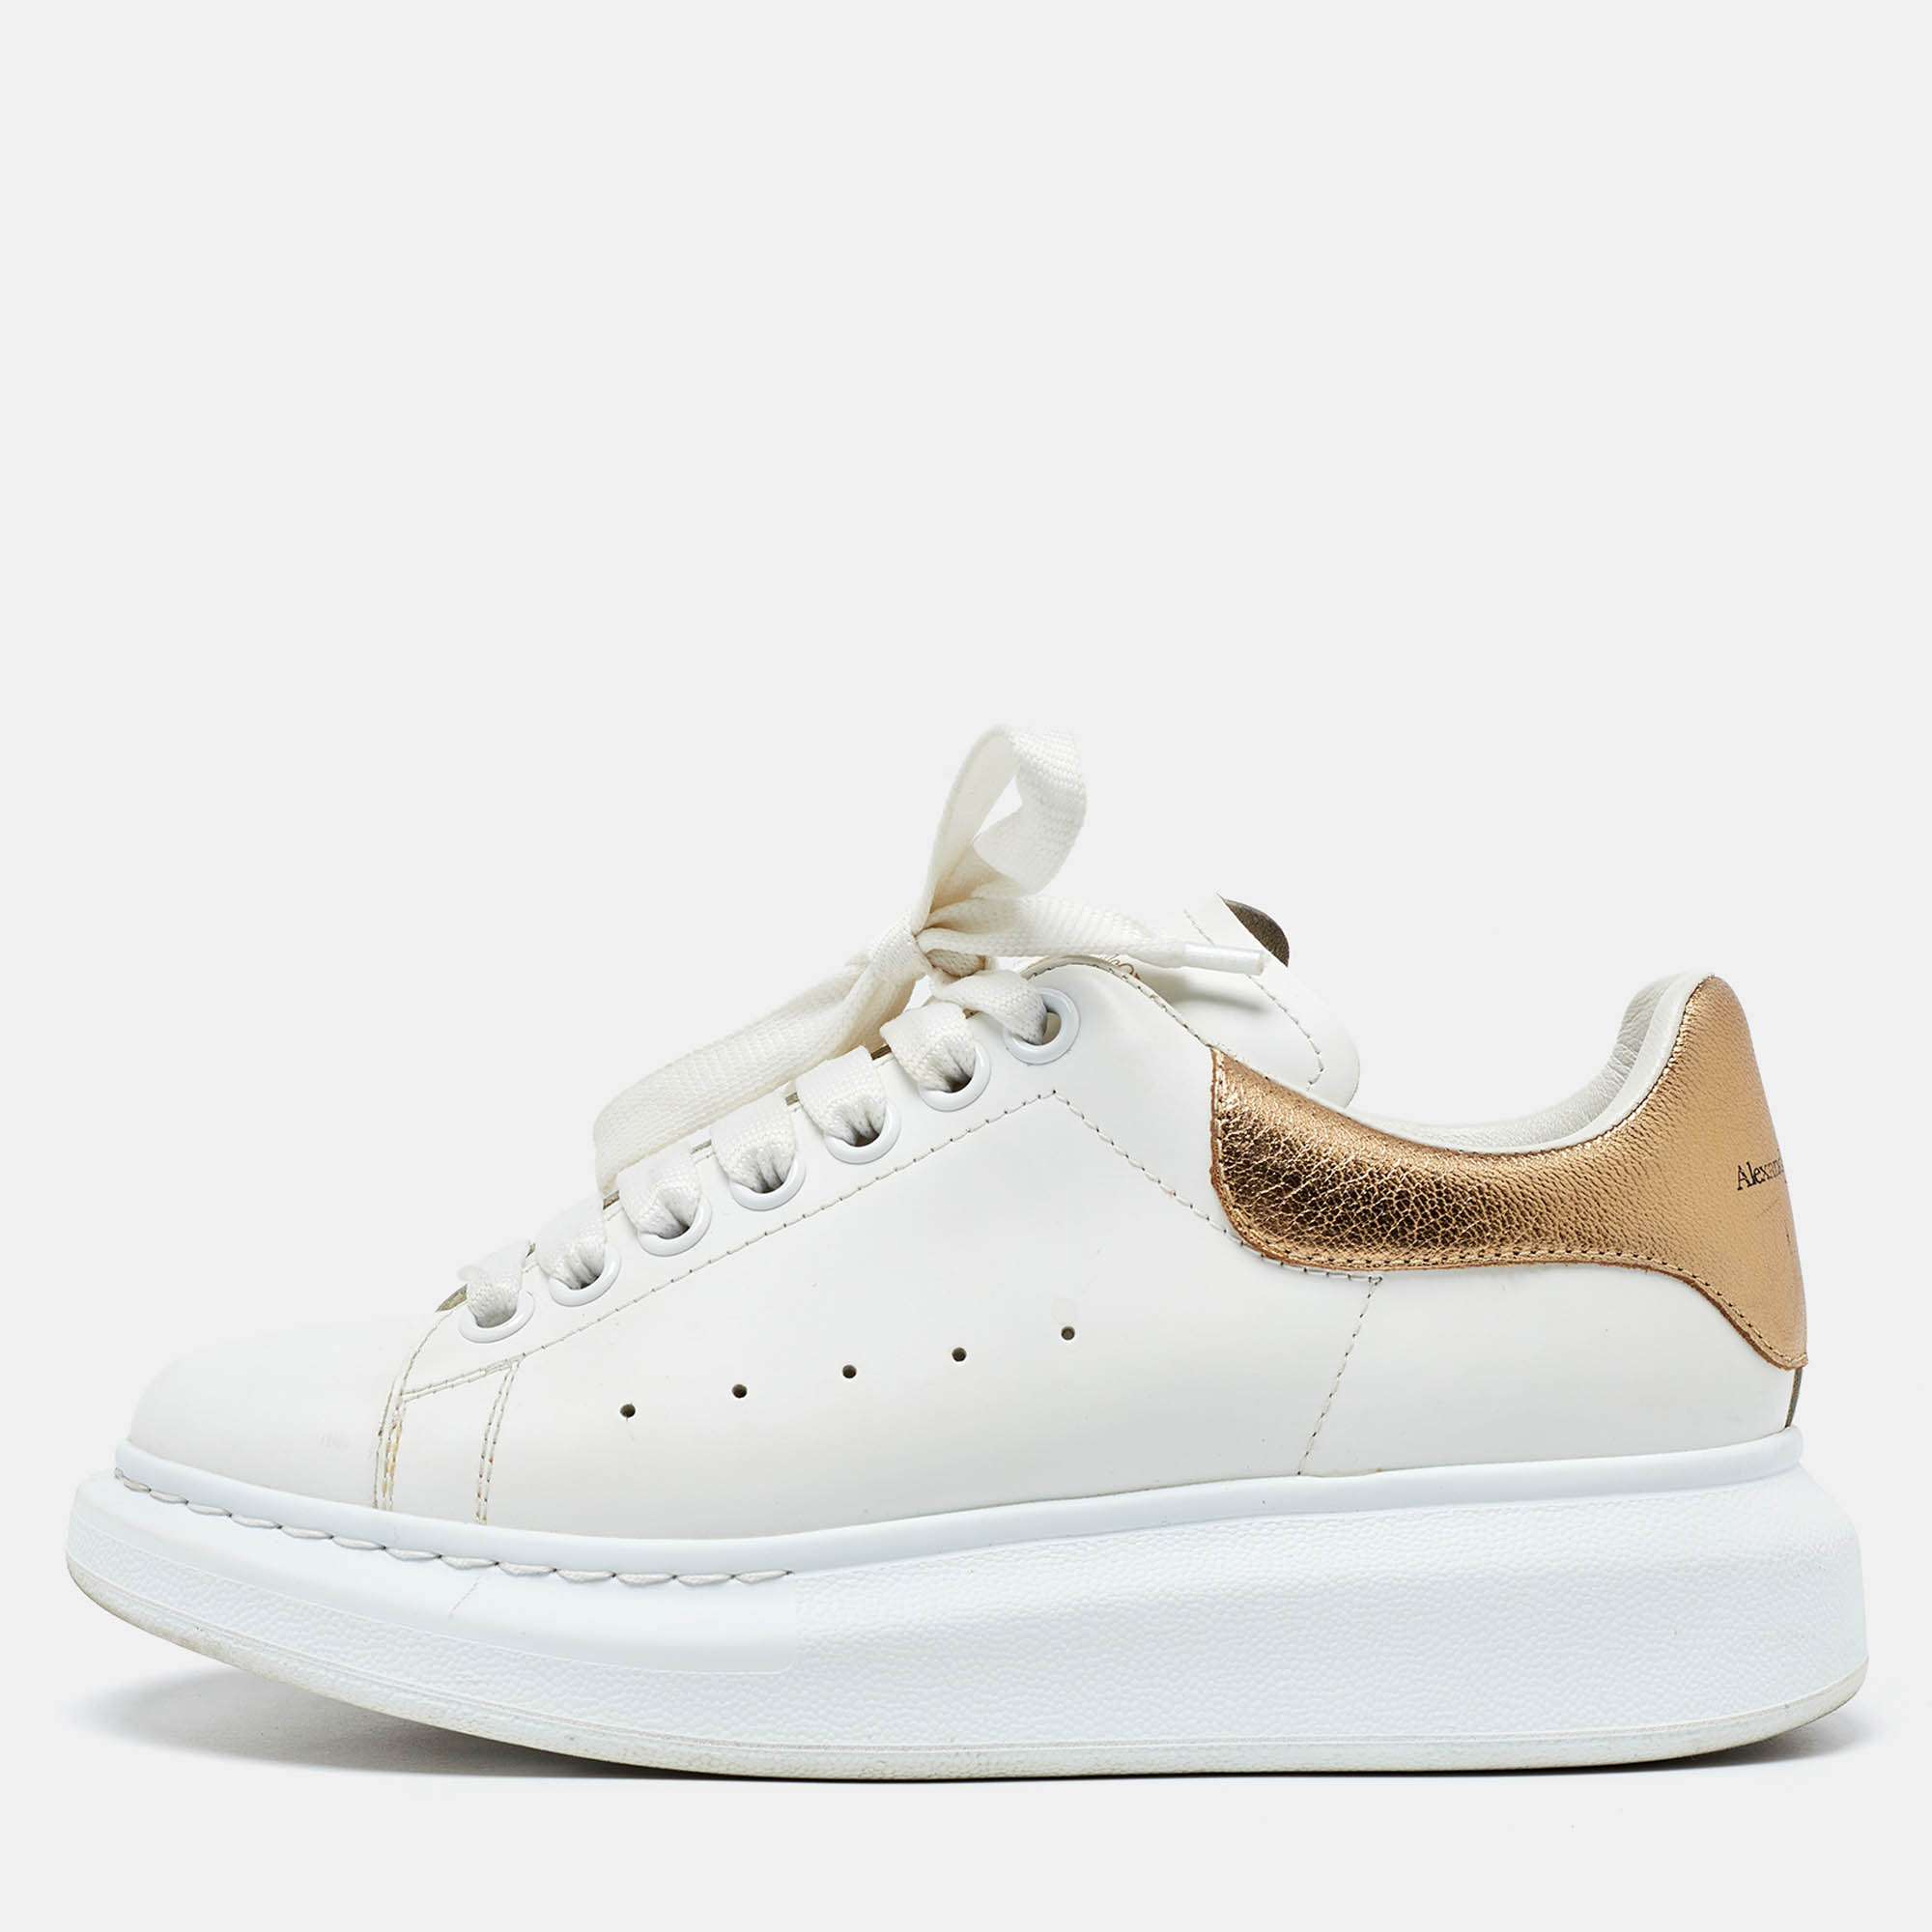 

Alexander McQueen White/Gold Leather Oversized Sneakers Size